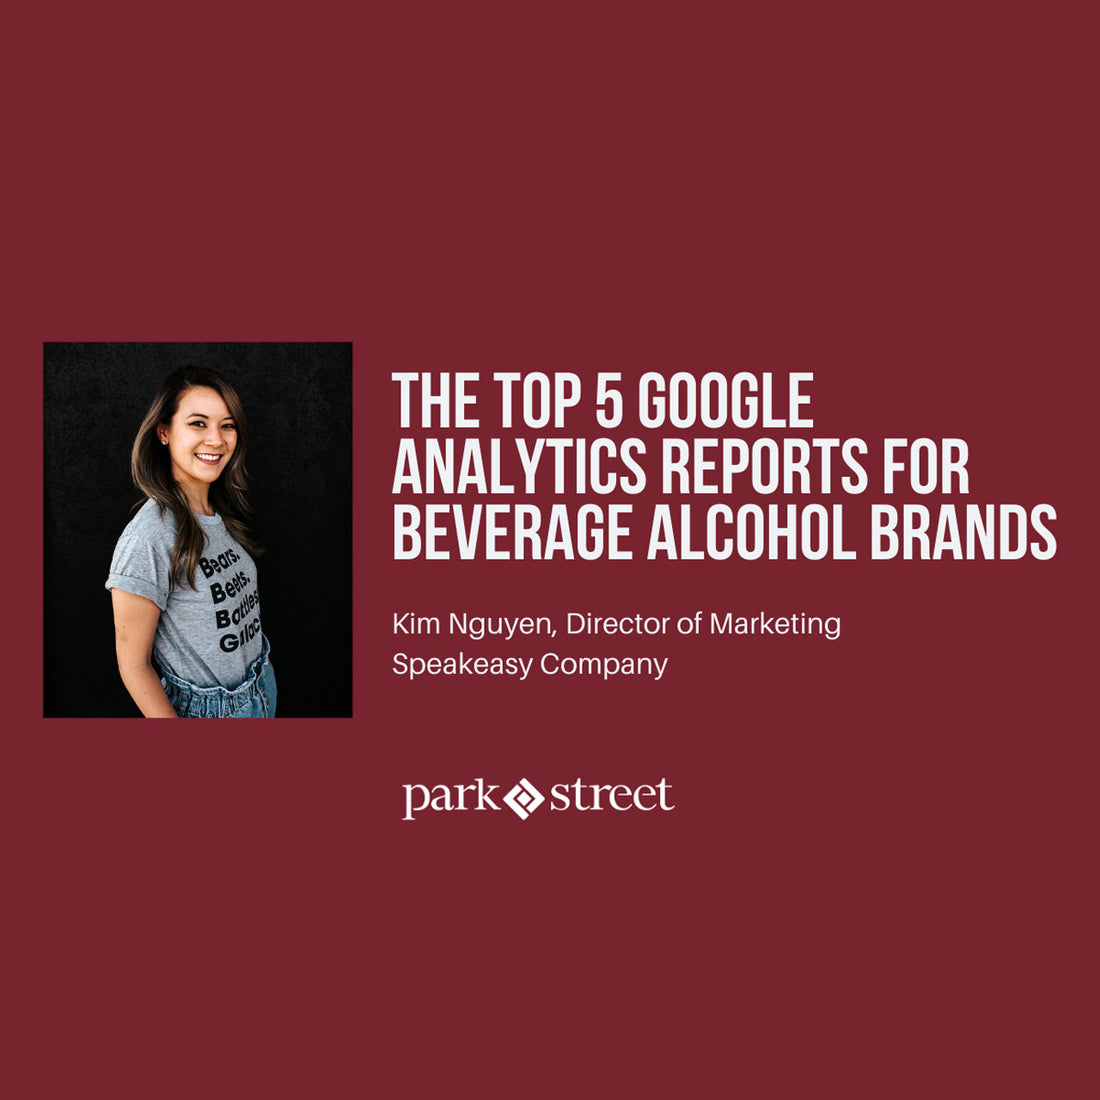 The Top 5 Google Analytics Reports for Beverage Alcohol Brands